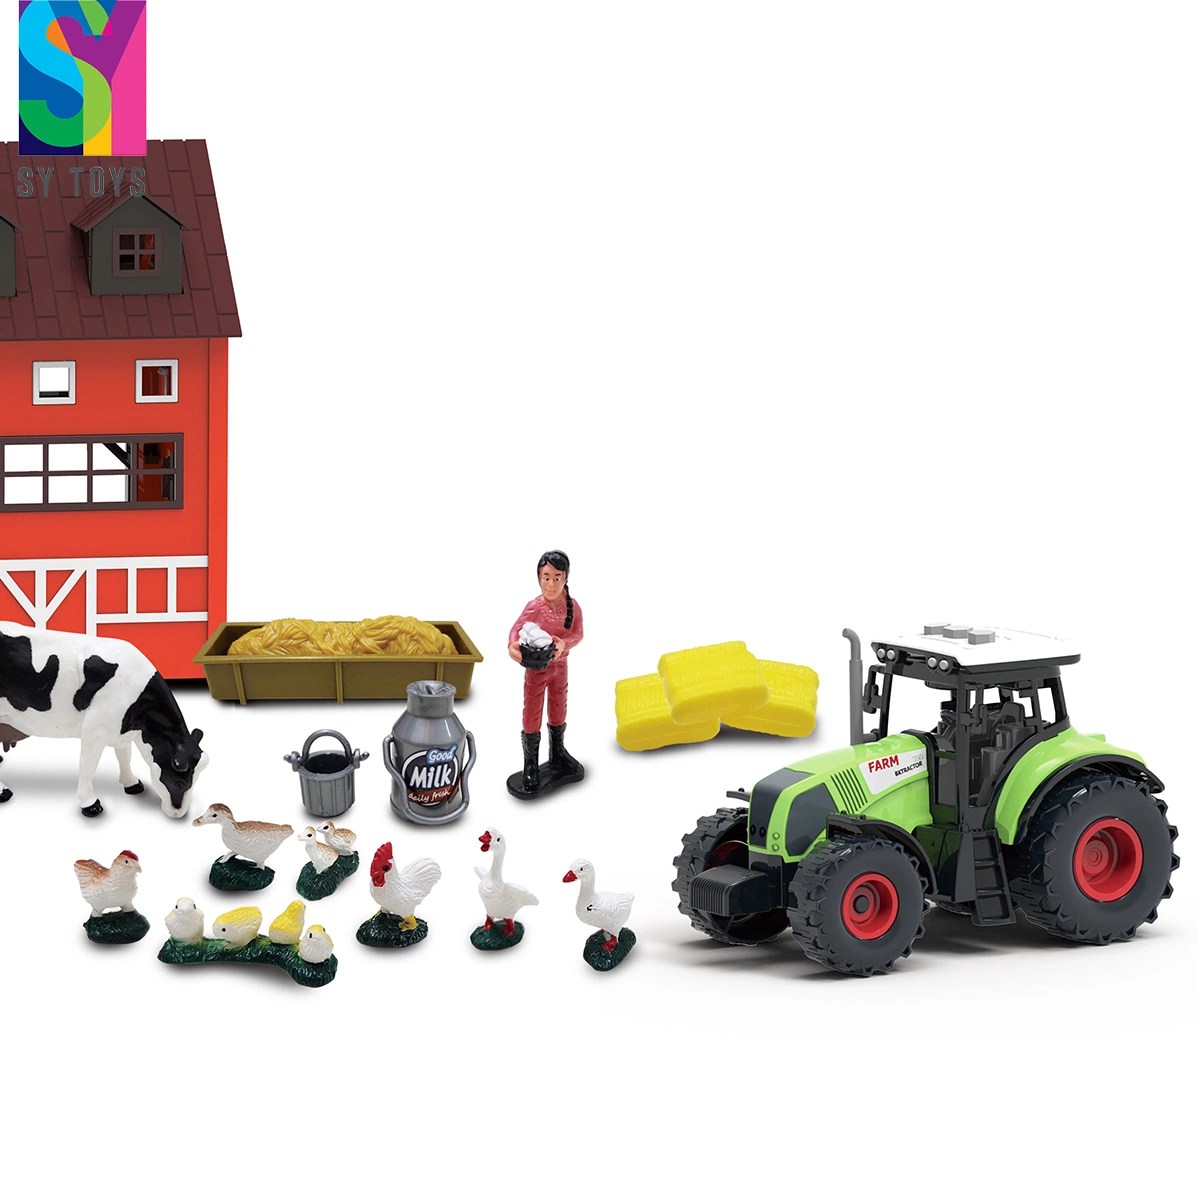 Sy Toys Pretend Play 101PCS DIY Plastic Small Animal Farm House Tractor Model Toys for Kids